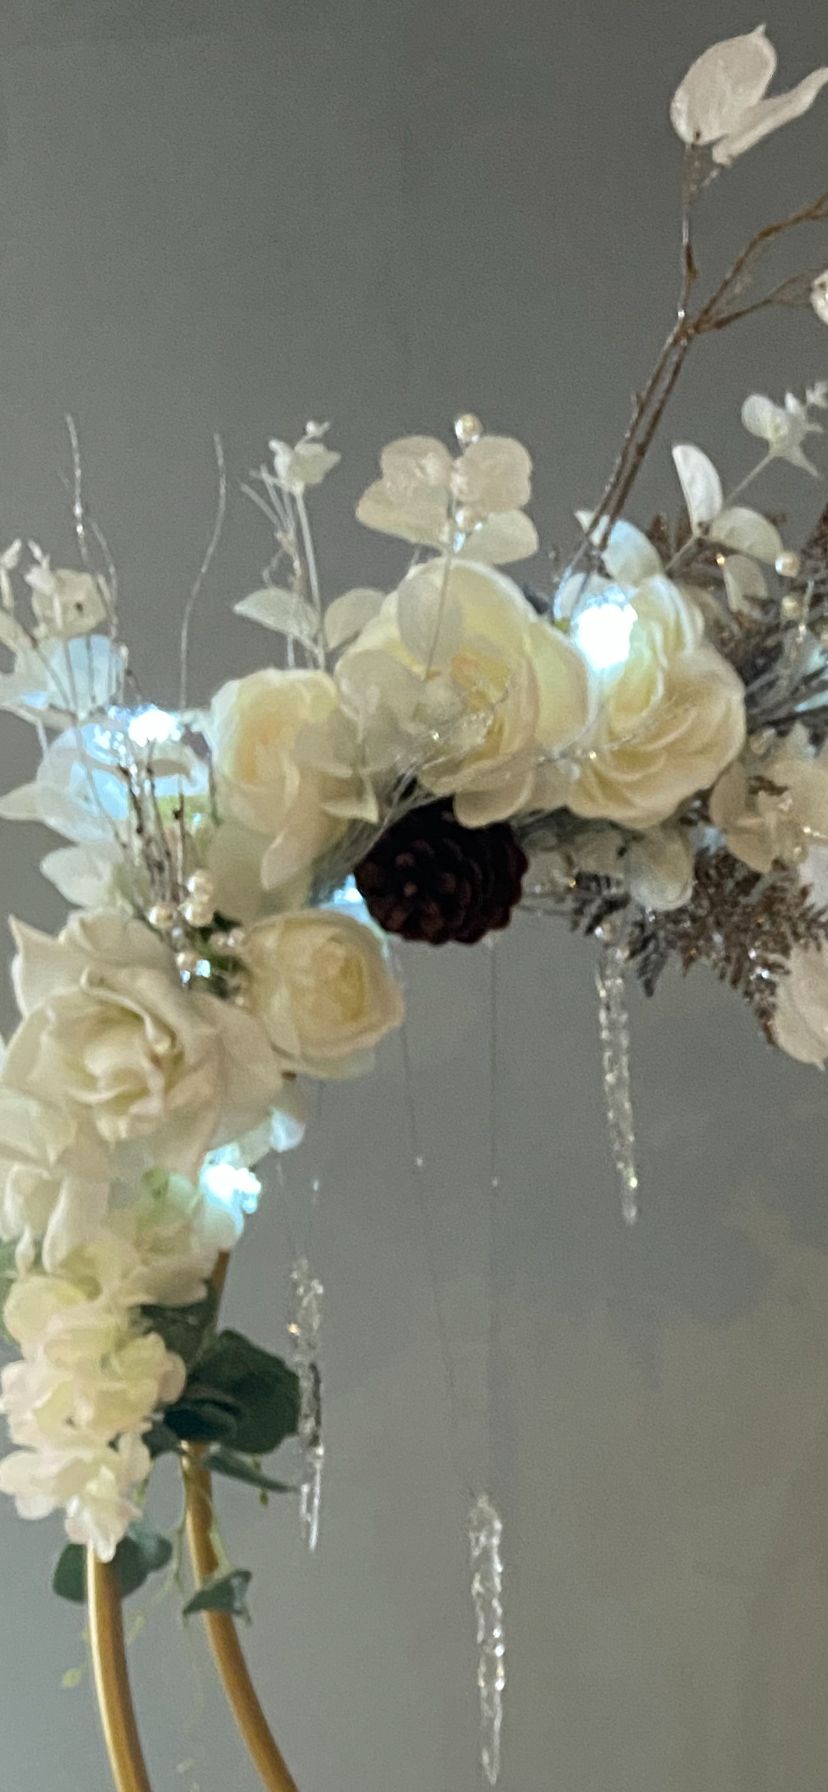 White flowers and crystal decorations on cake stand